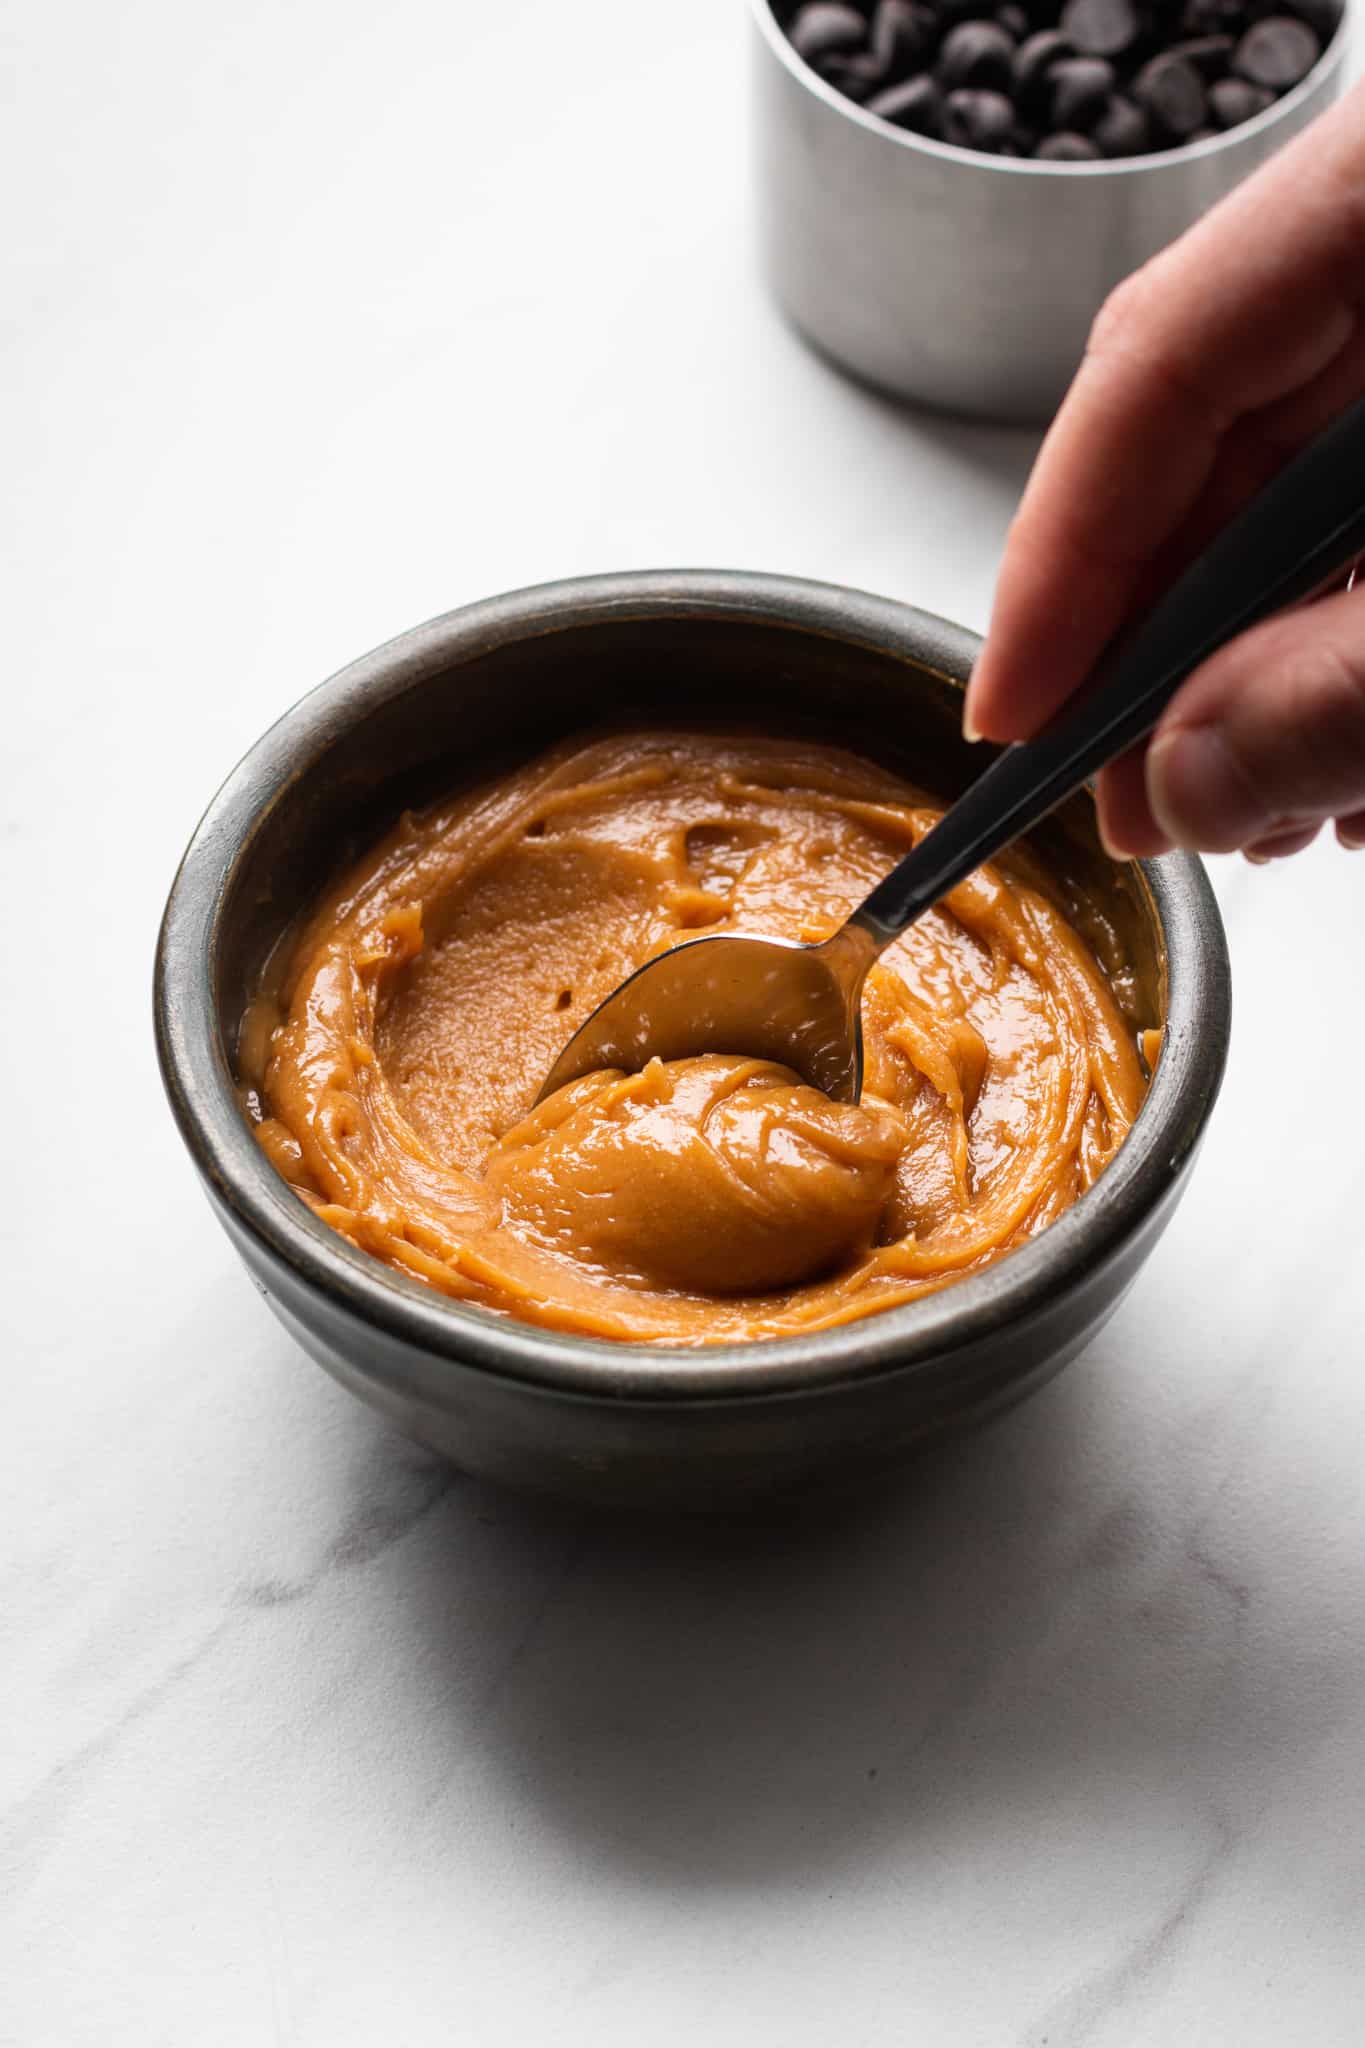 spoon scooping caramel in a bowl